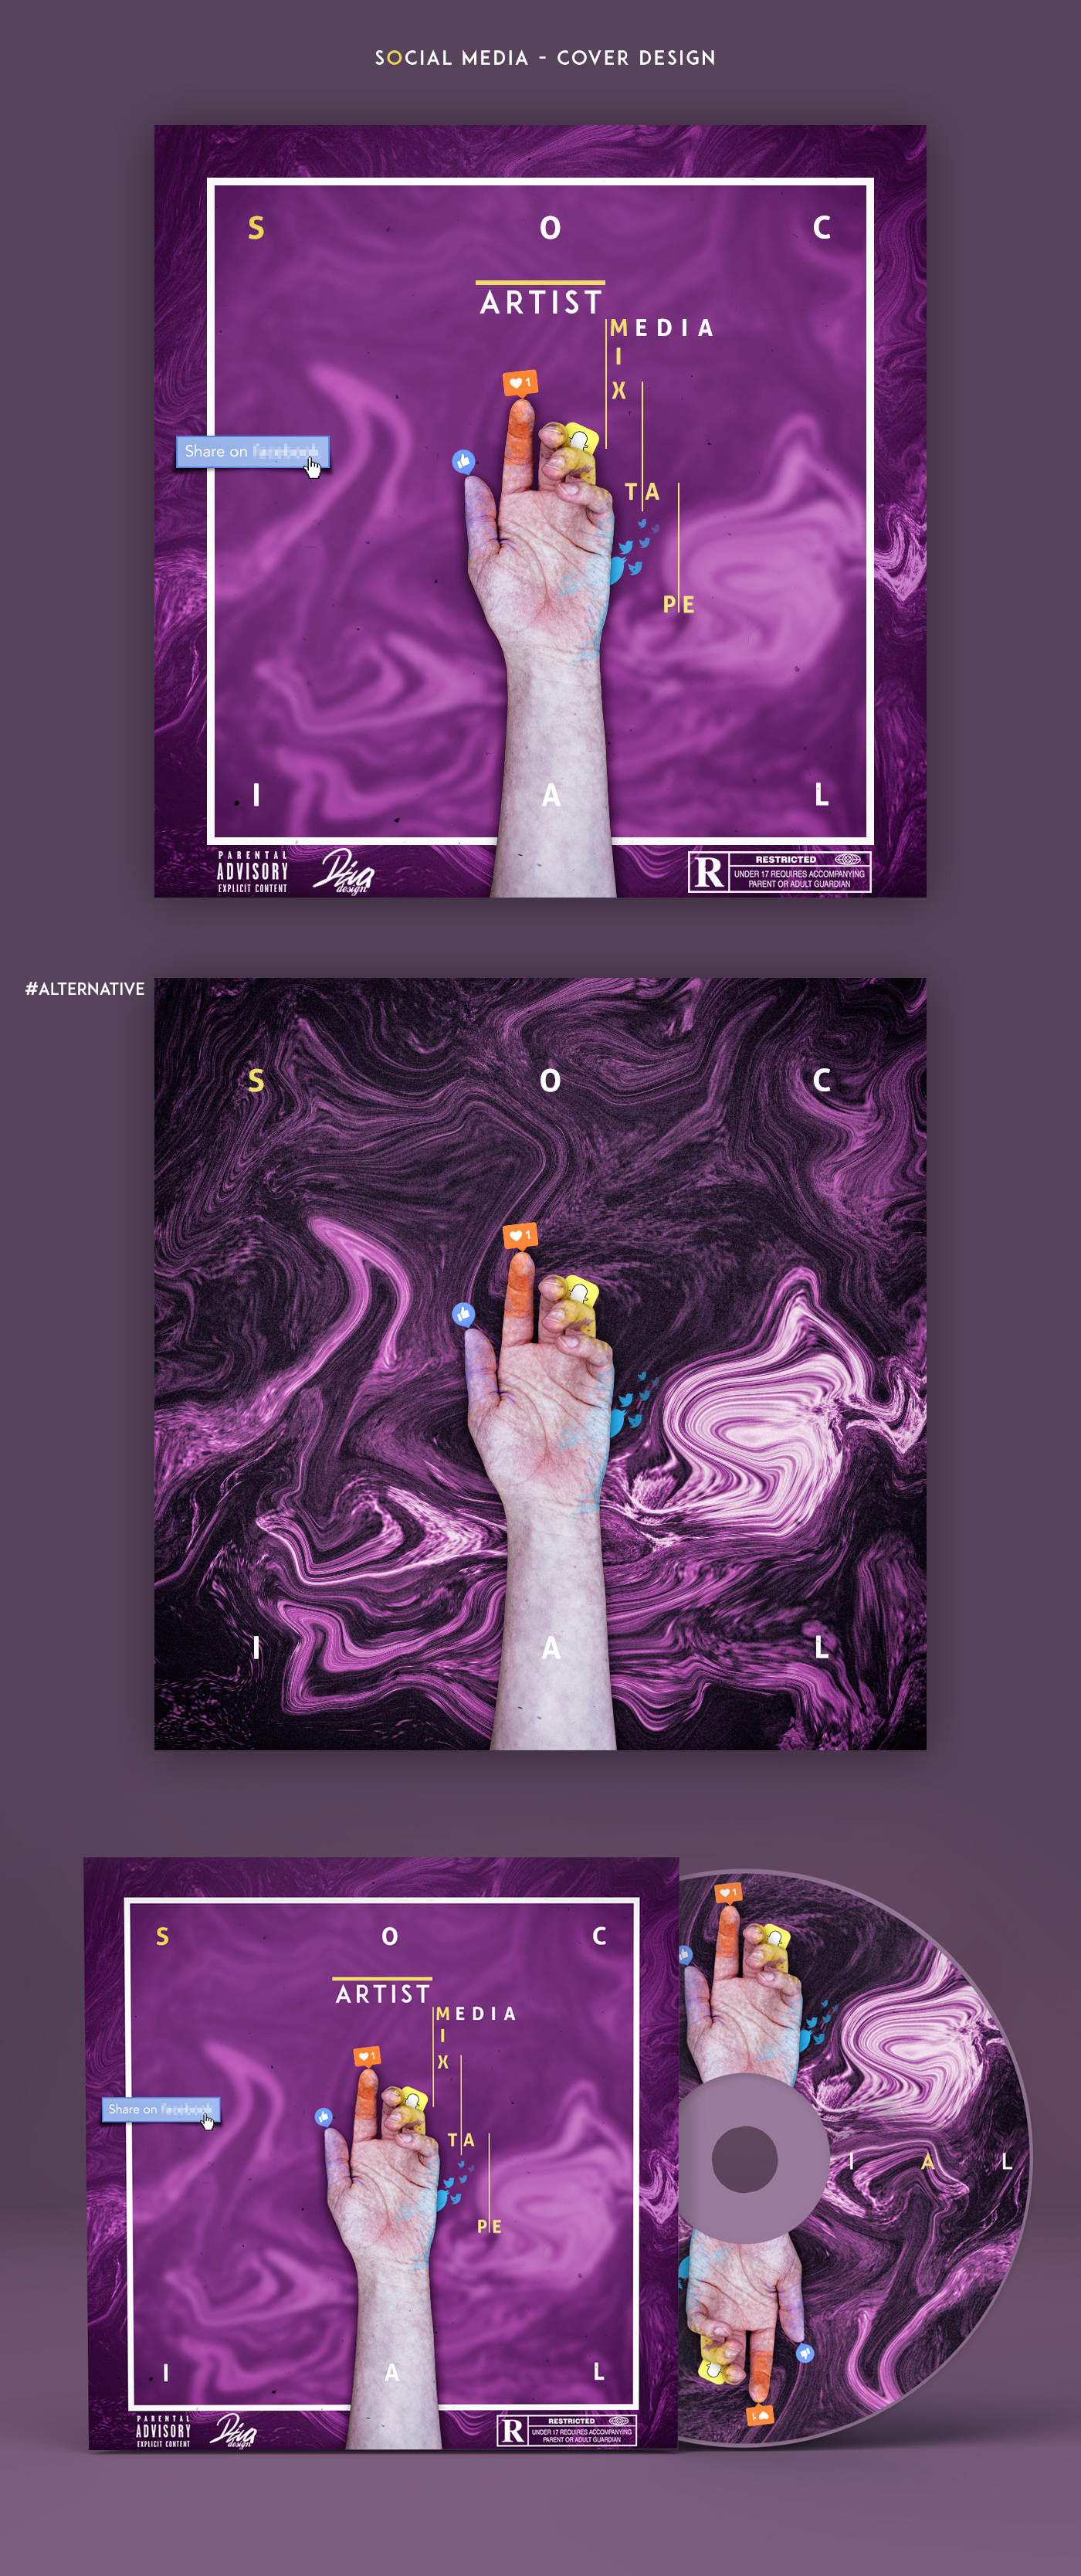 music social media cover design cover design graphic abstract